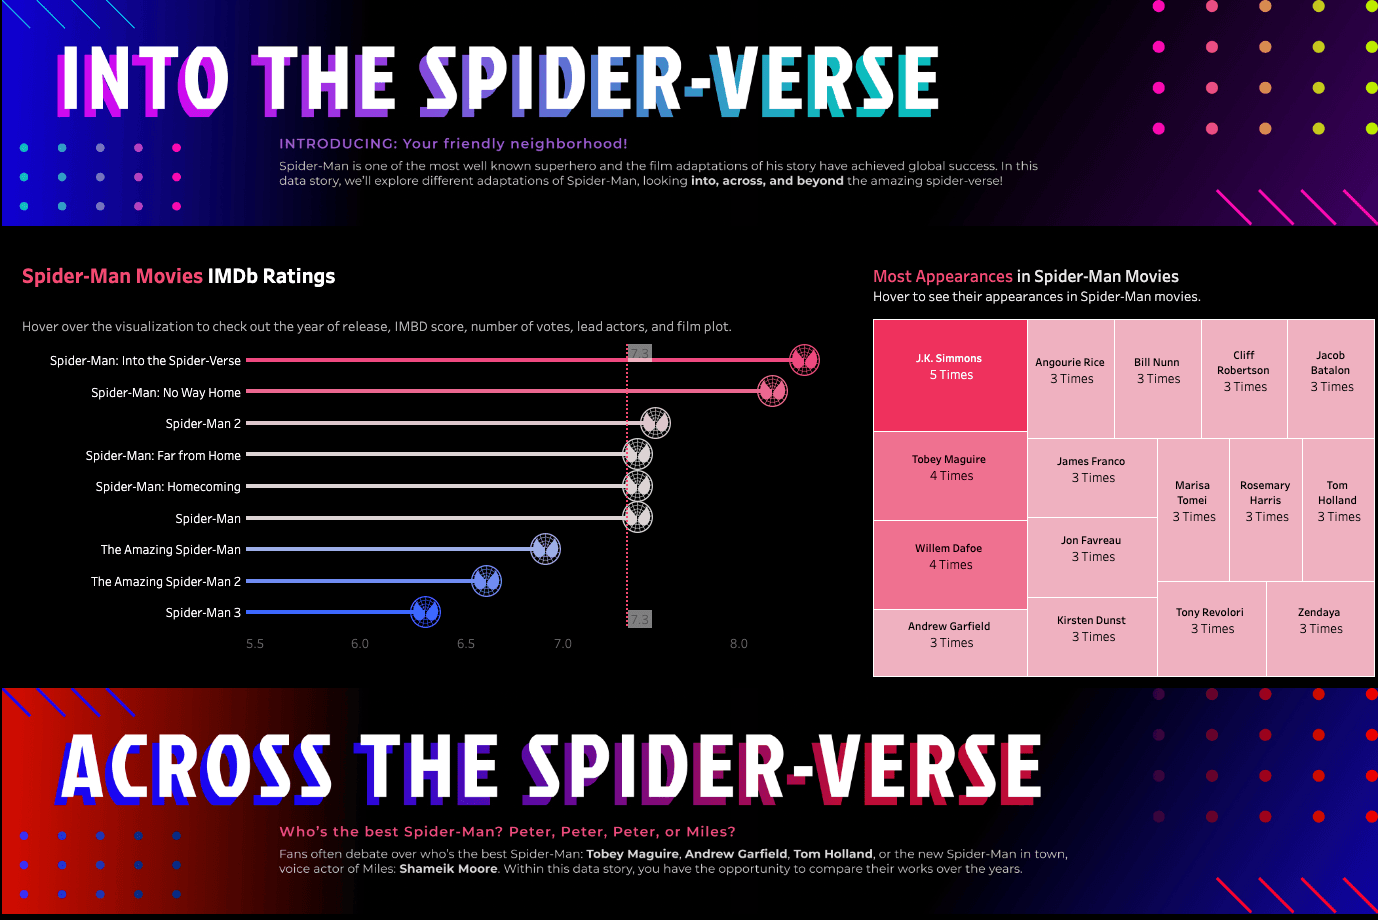 Navigate to Data+Movies: Into the Spider-Verse by Xinran Peng